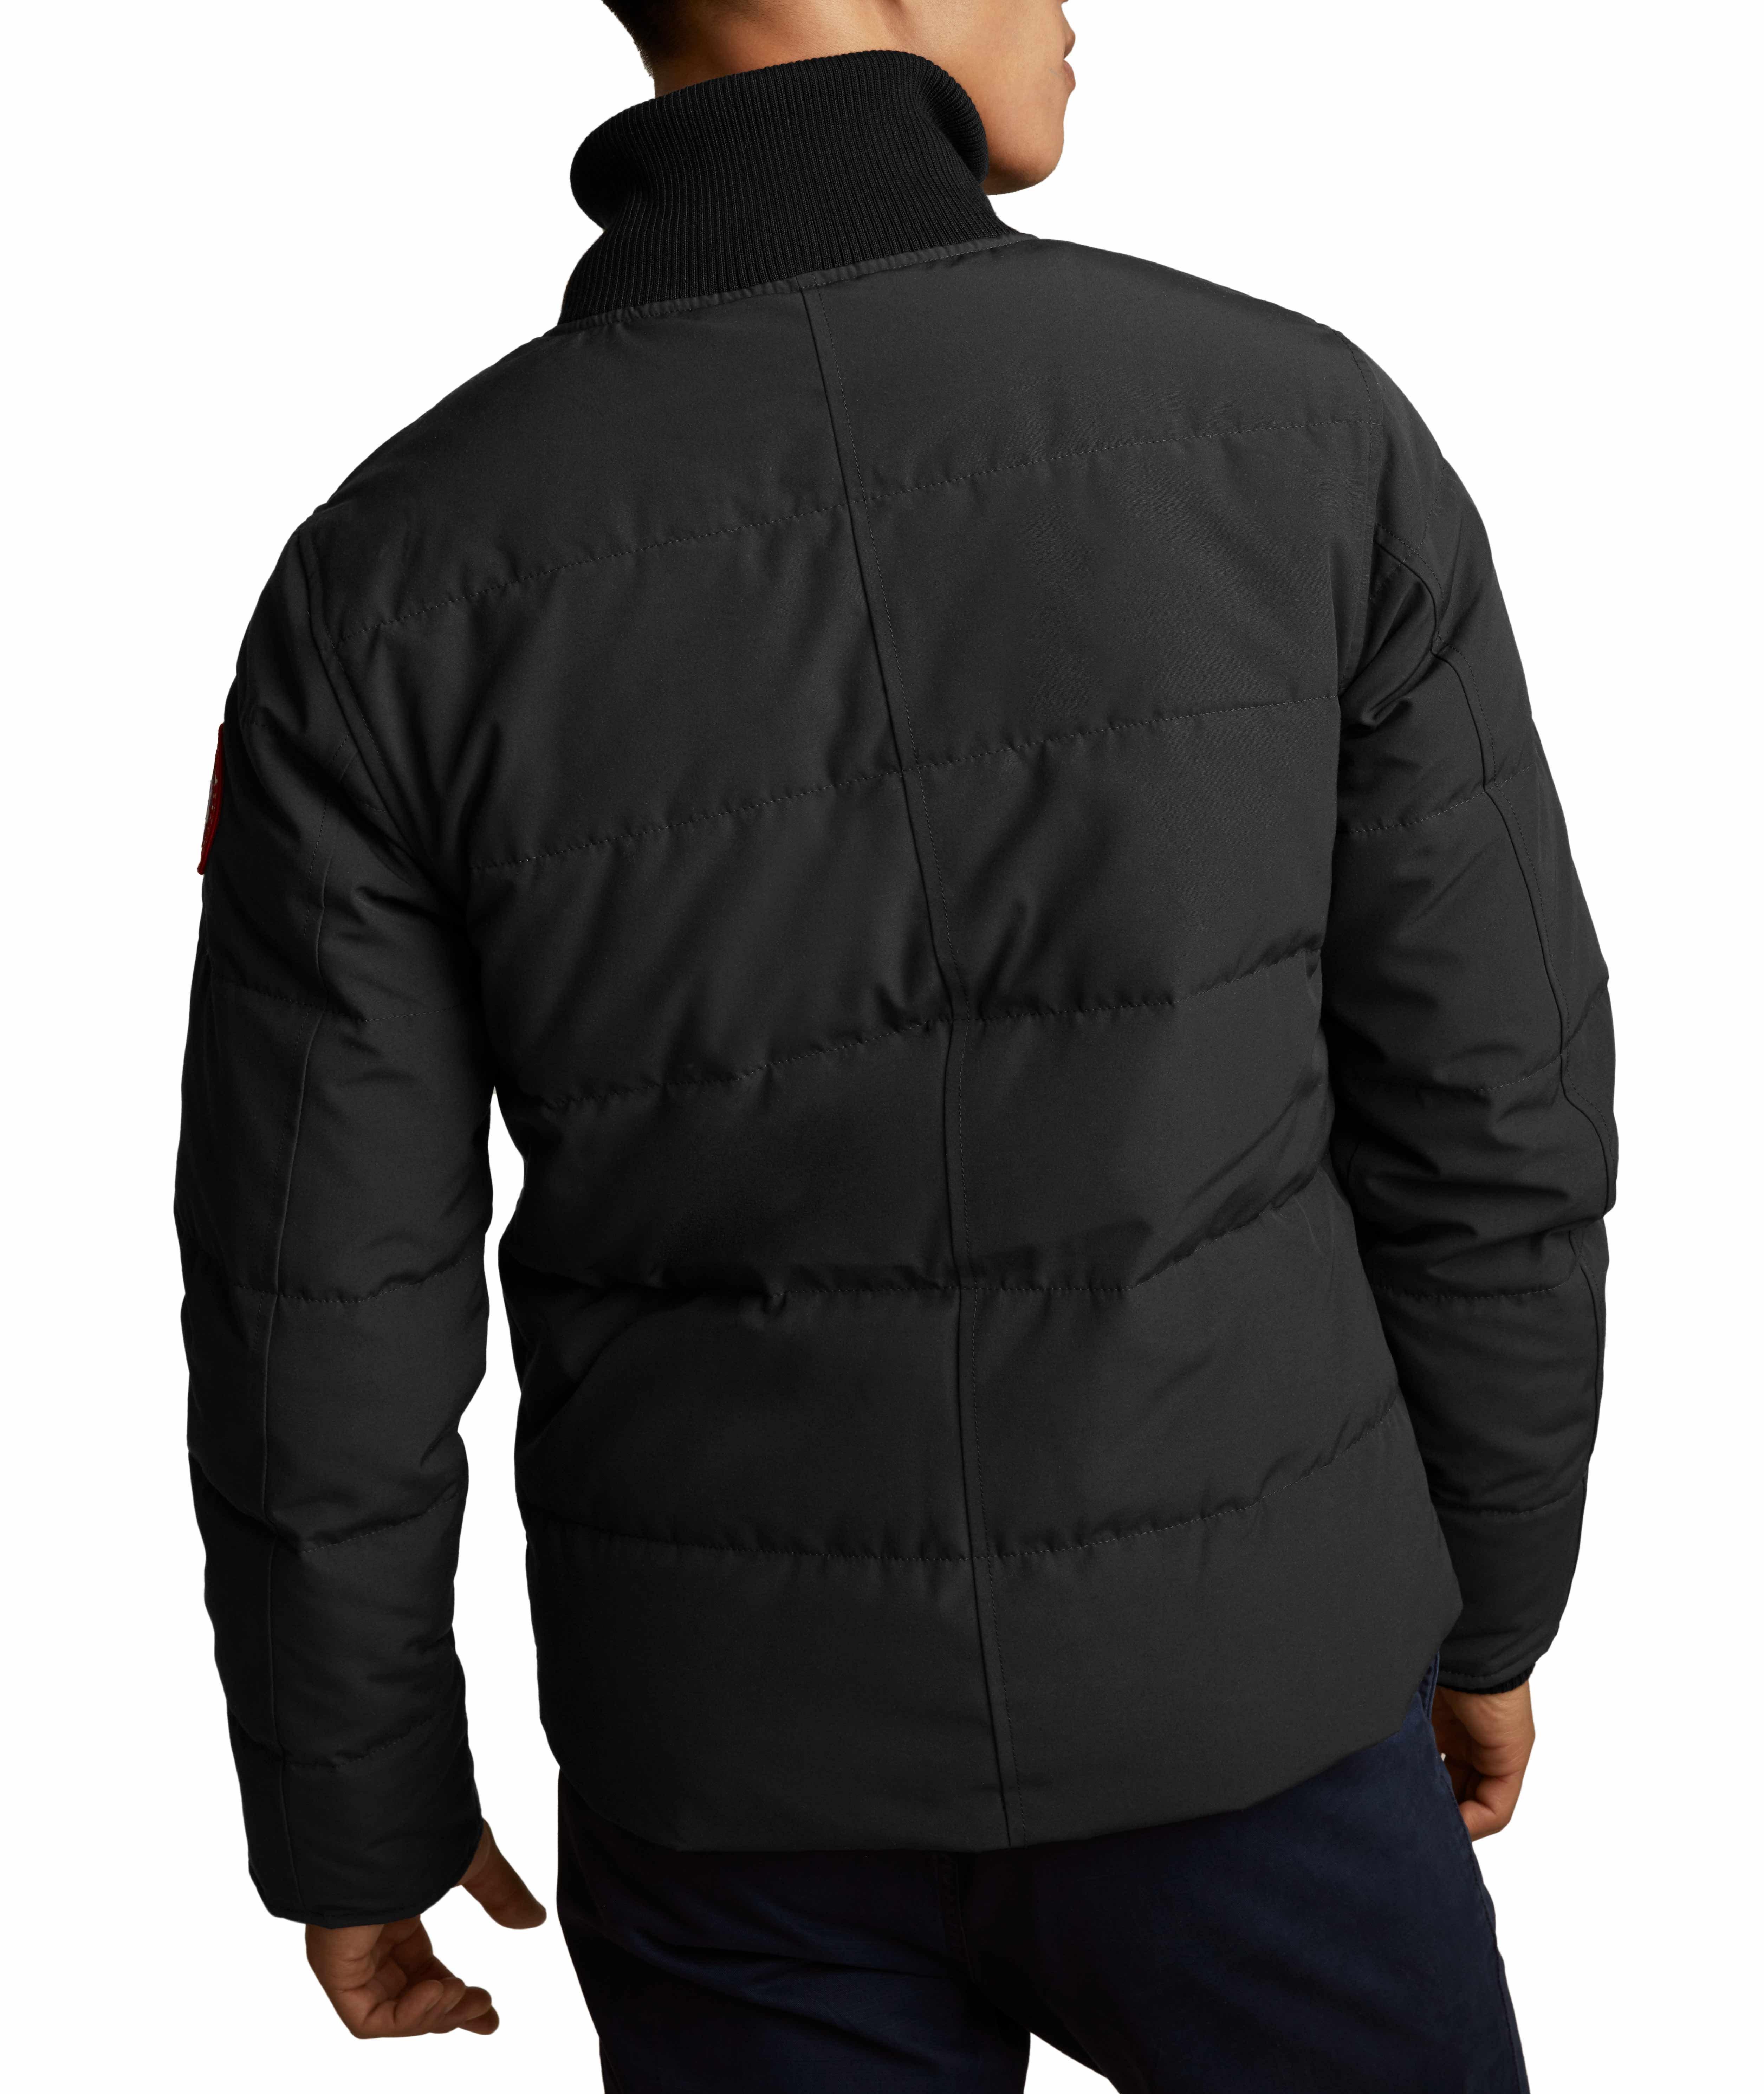 Woolford Jacket Fusion Fit image 1